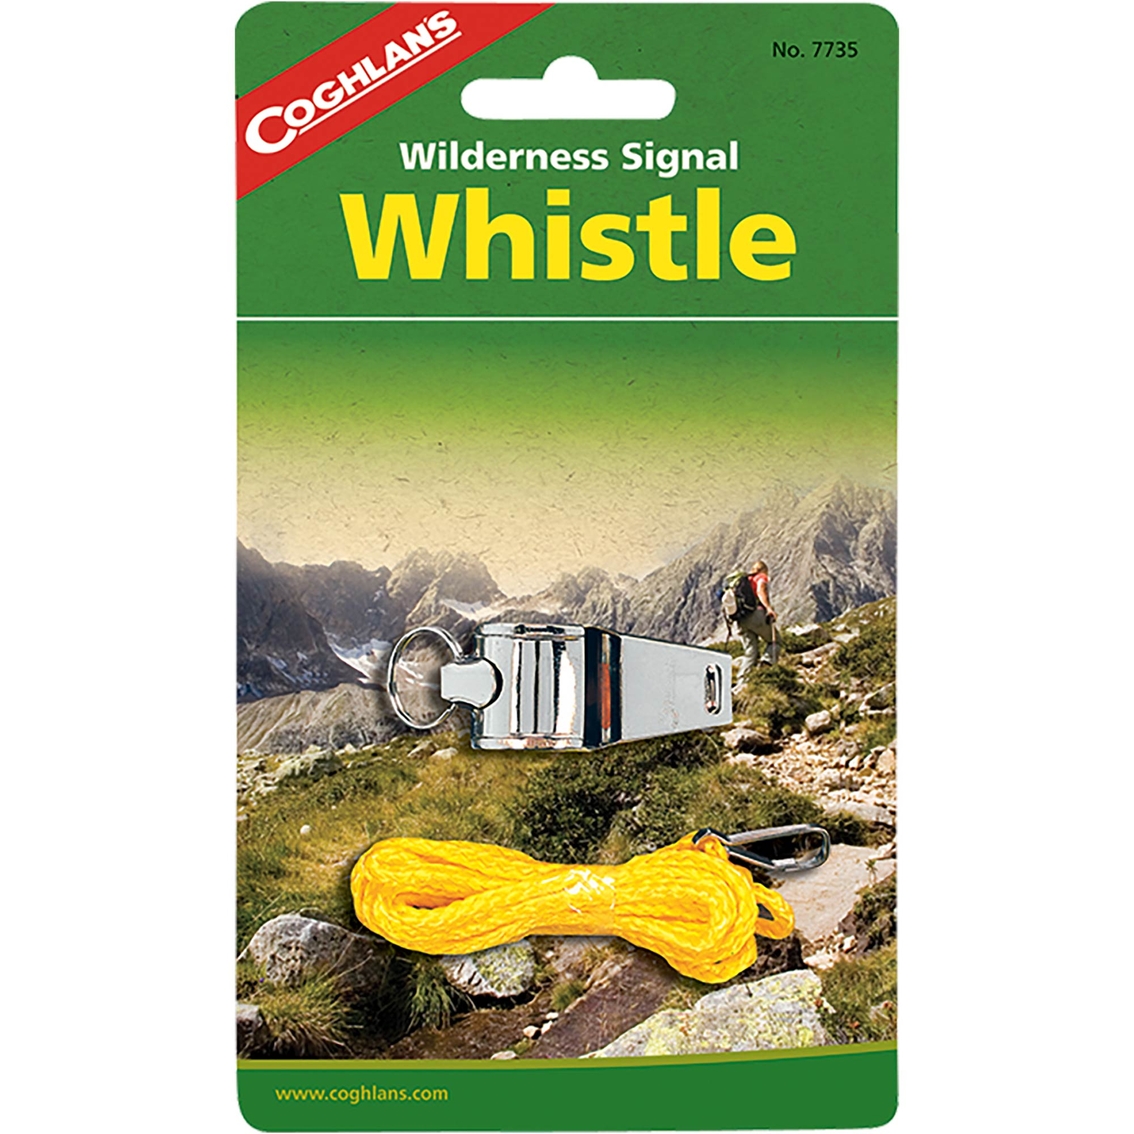 Coghlans Wilderness Whistle - Image 2 of 2